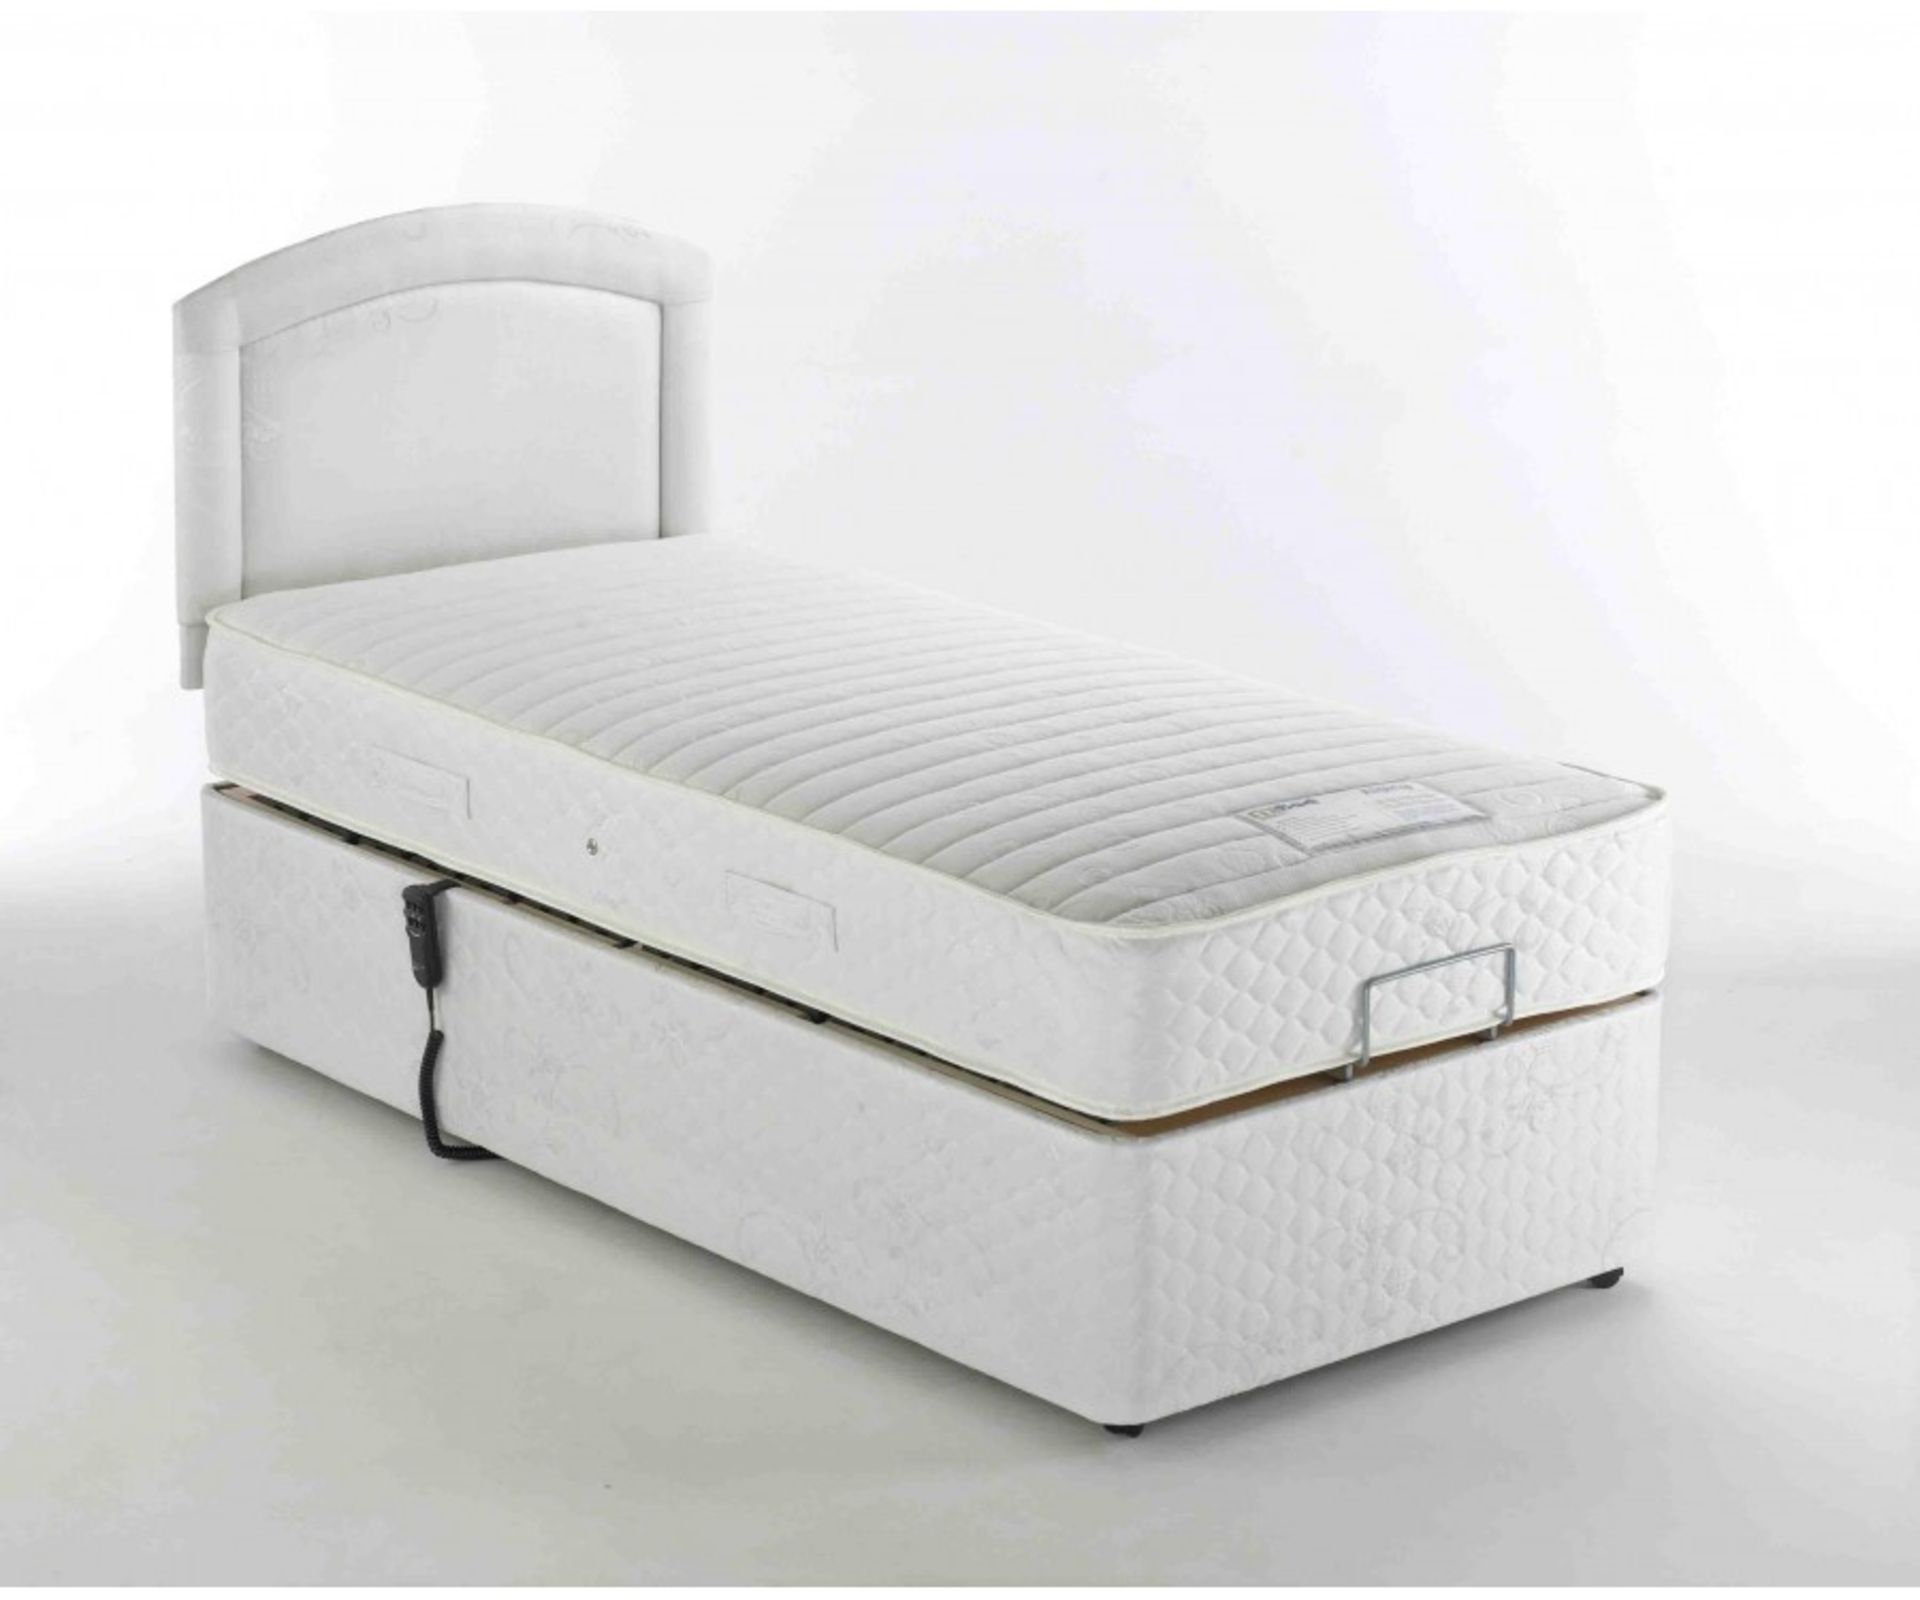 Brand new 3'0 single adjustable electric bed with pocket sprung mattress